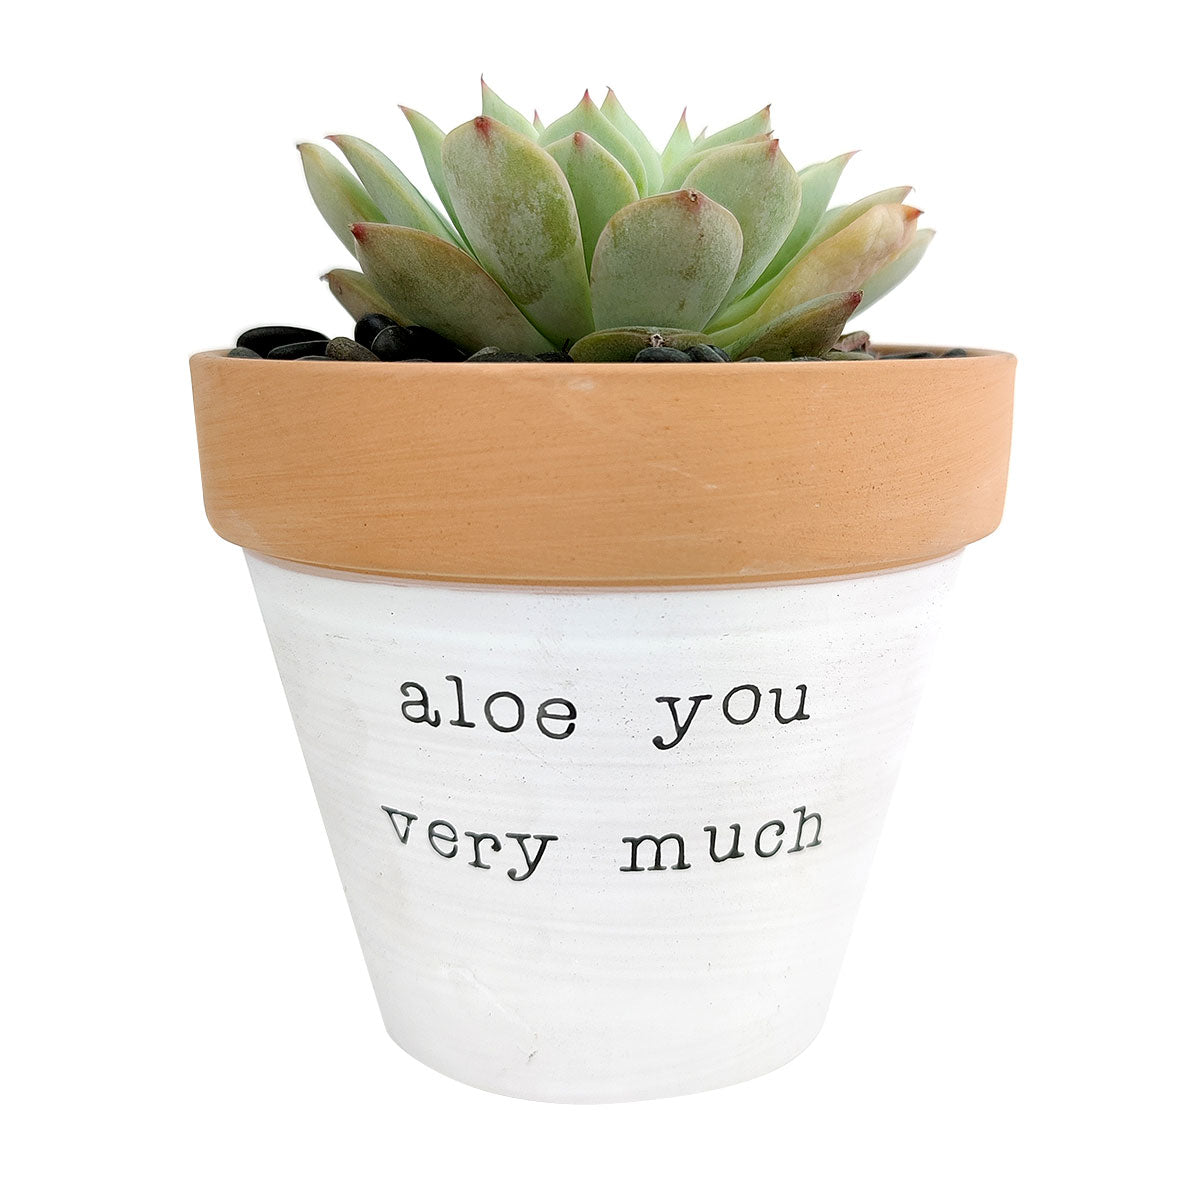 Aloe You Vera Much Pot for sale, Funny Planter, Plant with Pun, Terre cotta succulent and cactus pot, Mother's Day Gift, Gift for Mom, Indoor Planter, Gift for Plant Lovers